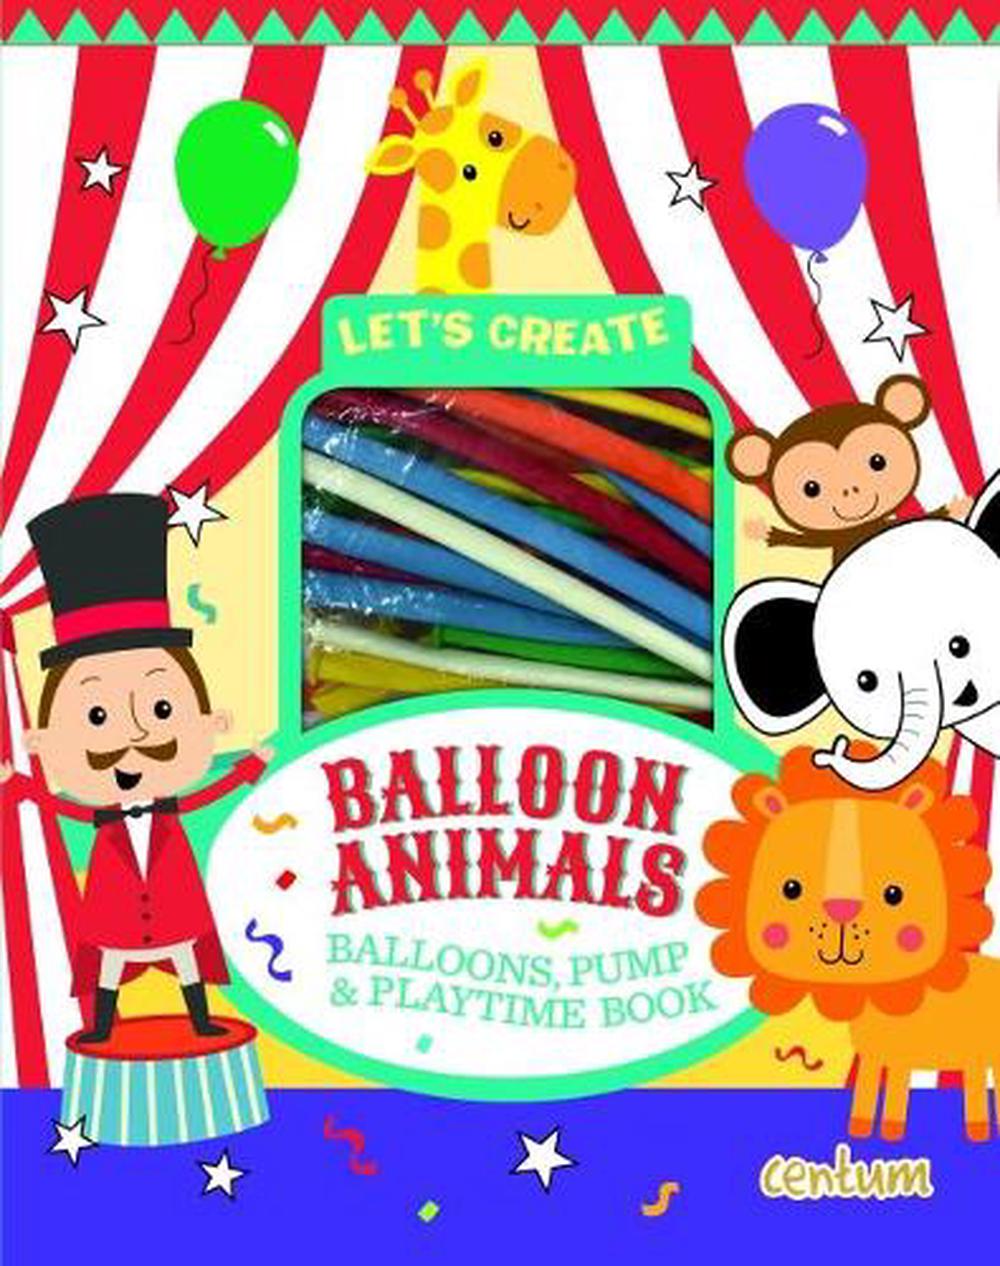 Let's Create - Balloon Animals, Hardcover, 9781913072476 | Buy online at  The Nile